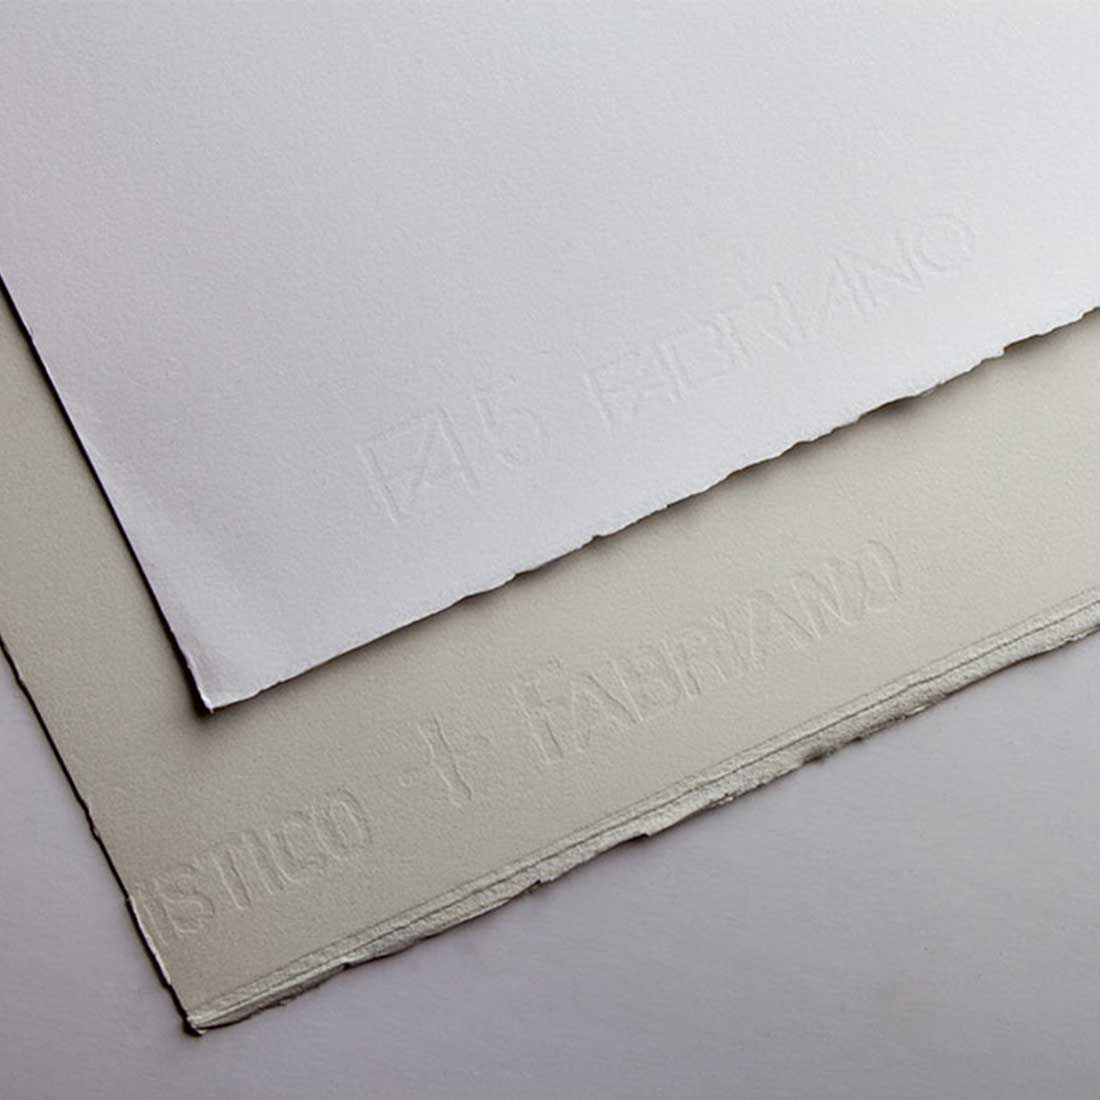 Fabriano Artistico ExtraWhite Watercolor Paper Cotton100% 56x76cm 300g  (Pack of 10sht) - CWArt : Inspired by LnwShop.com